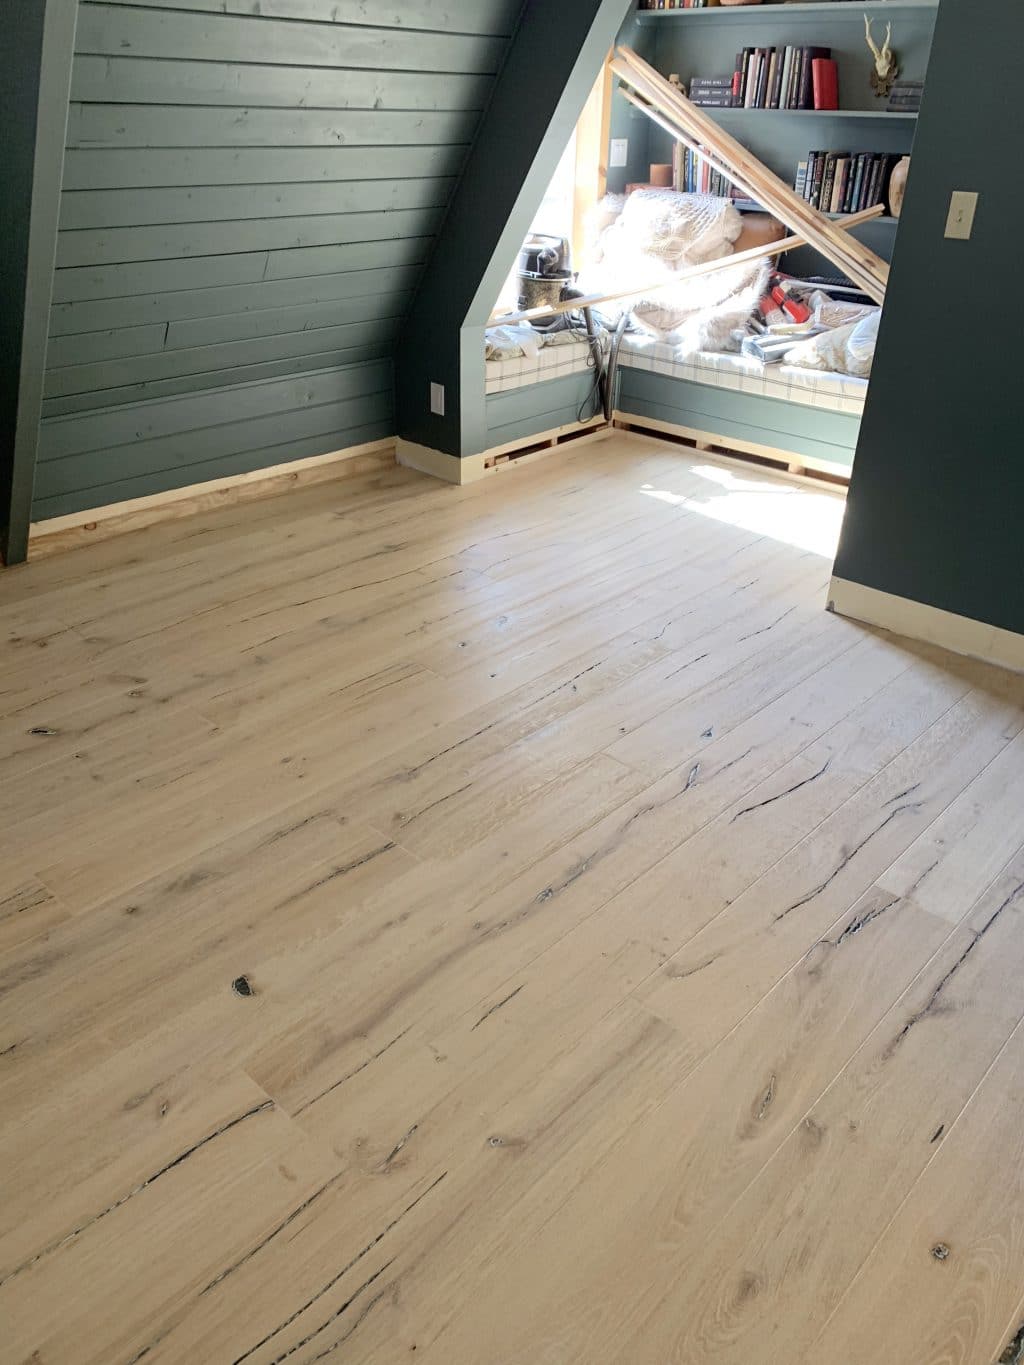 All about The New Wood Flooring throughout Our House! - Chris Loves Julia